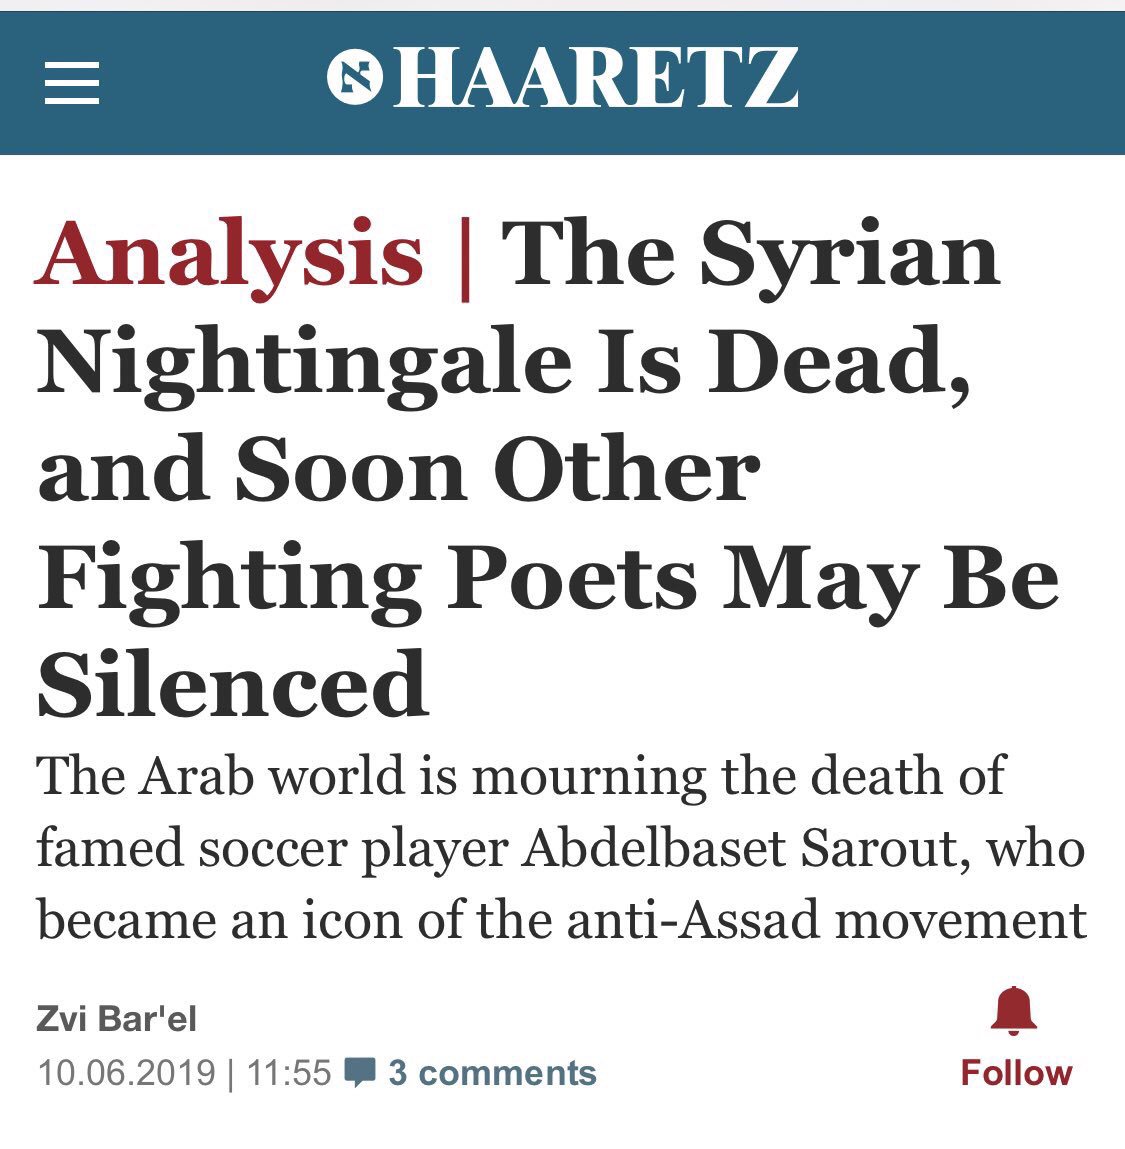 10/ And after Sarout's death, Sheikh Muheisni, the famous Saudi jihadi leader in Idlib, mourned him publicly and praised him. This is the guy Haaretz called a “nightingale” and “icon”!!